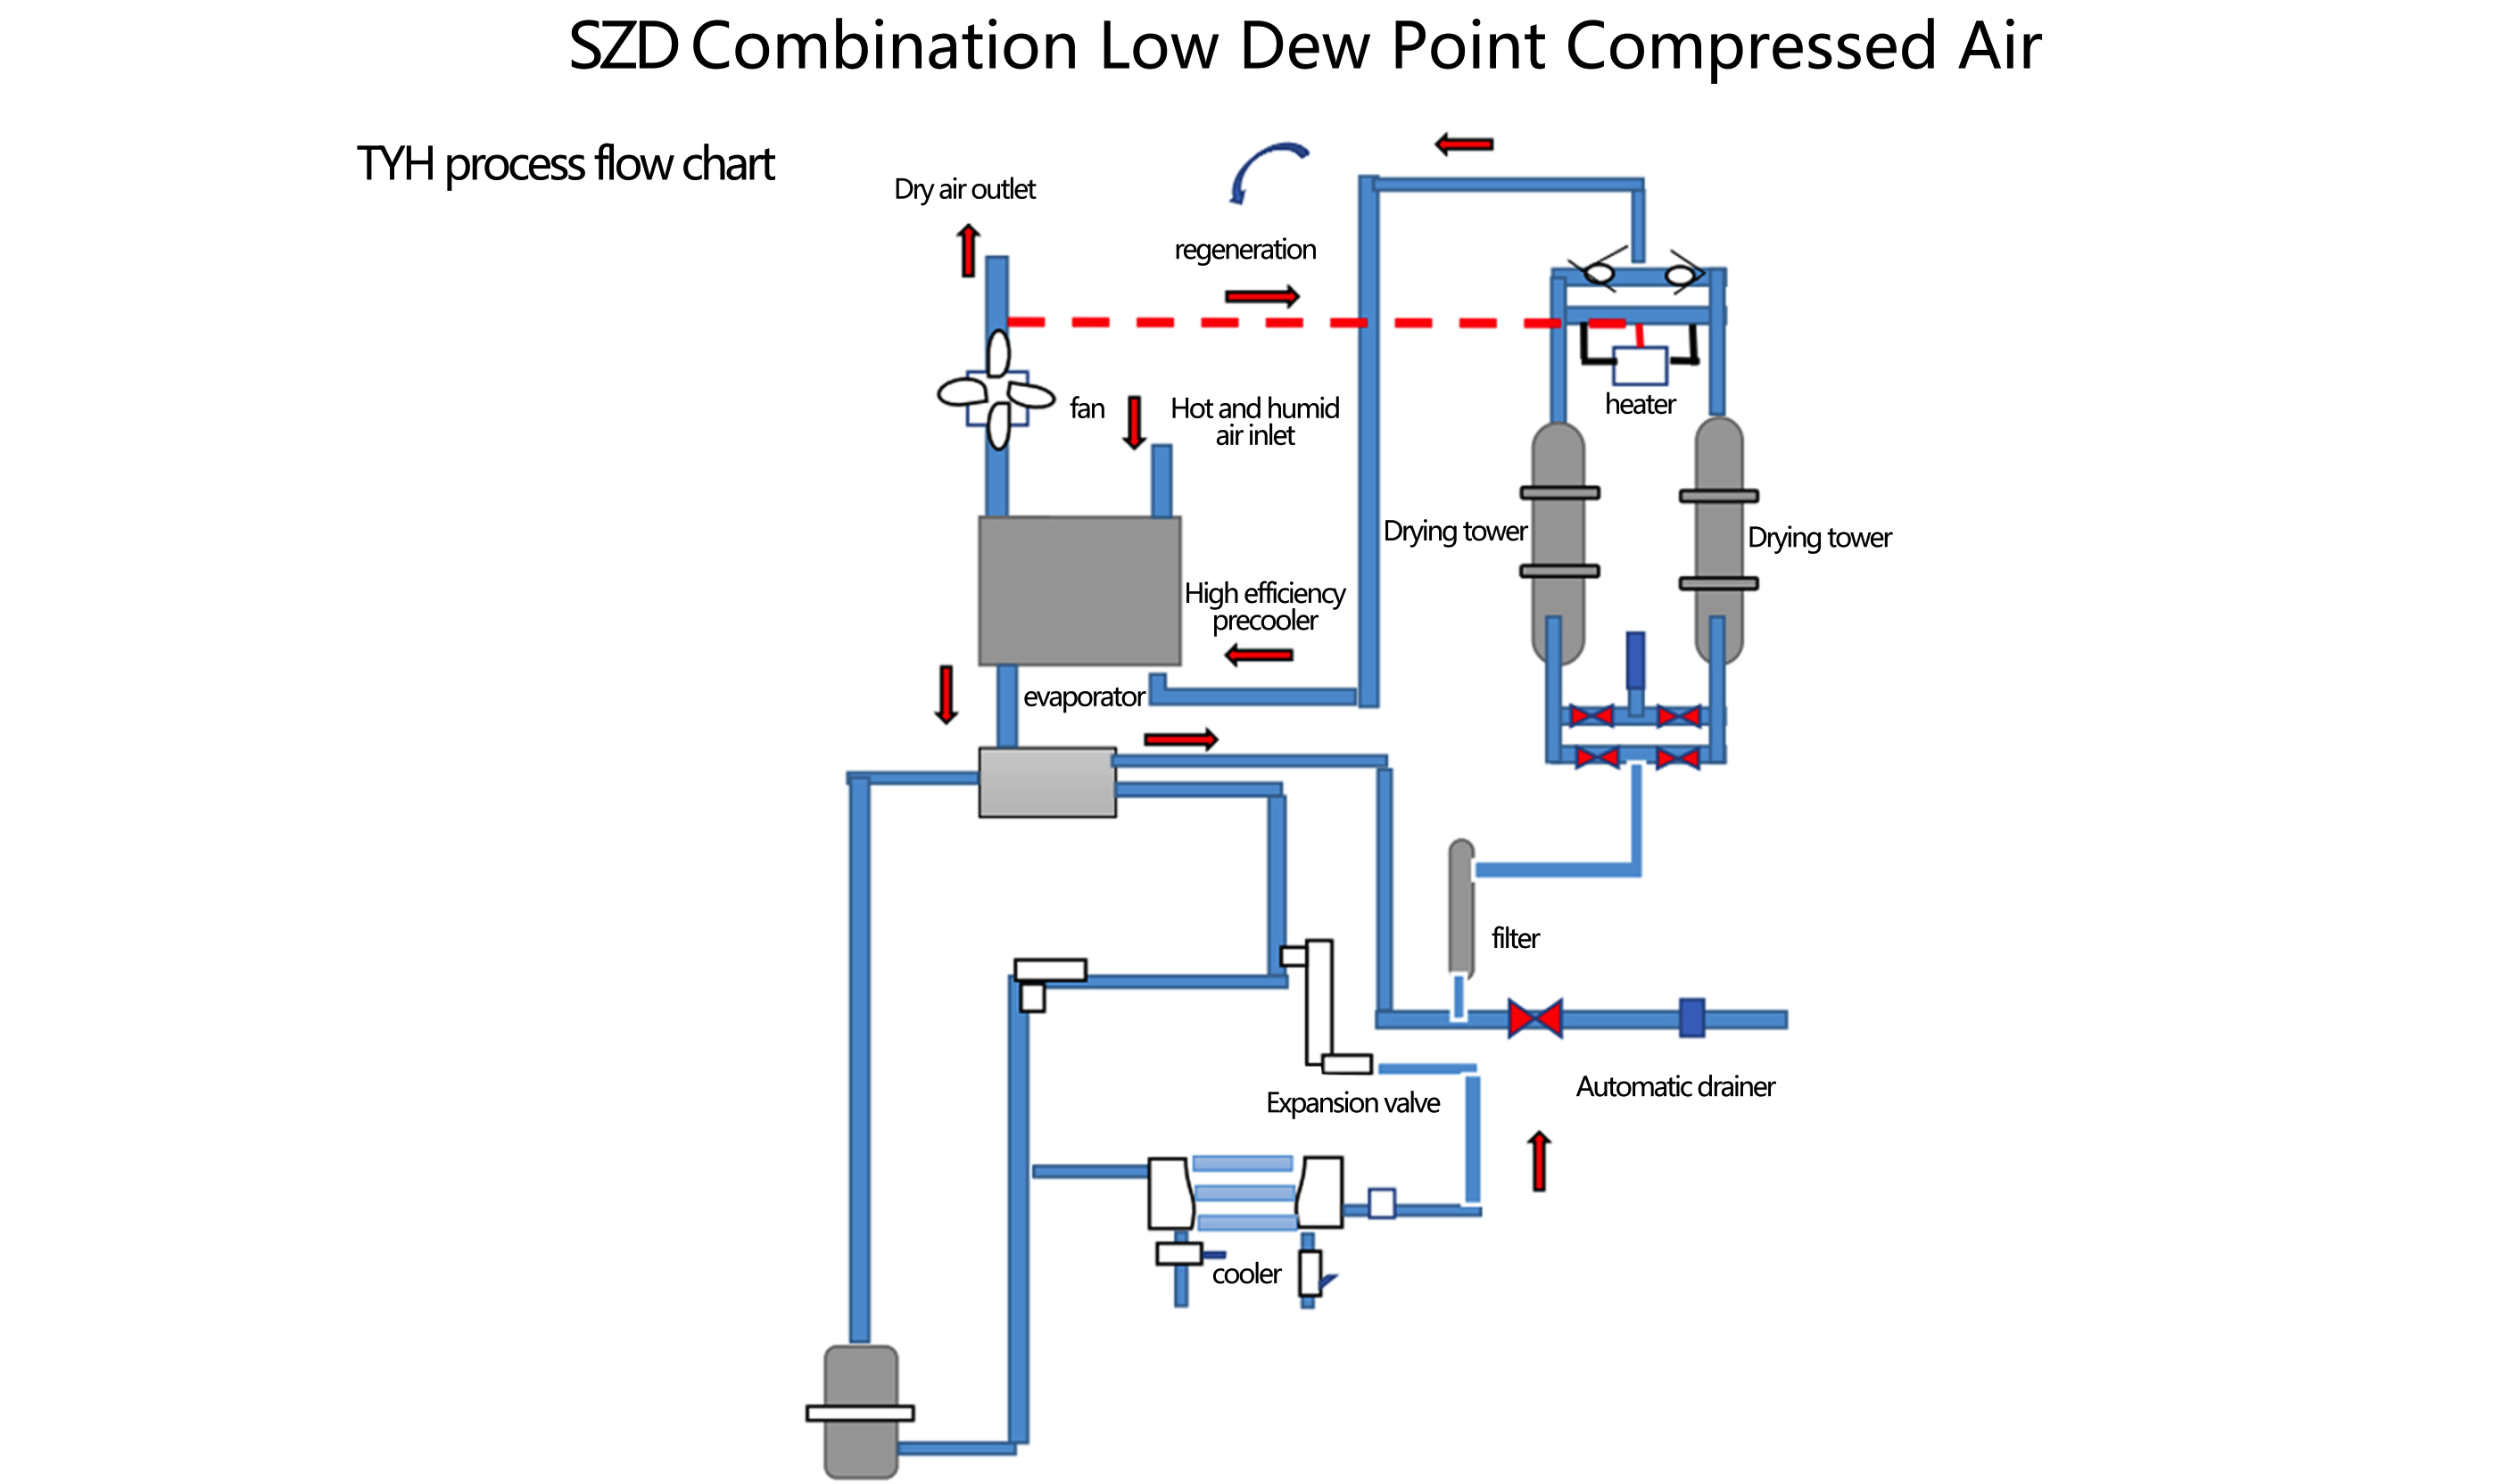 SZD Combination Low Dew Point Compressed Air dryer